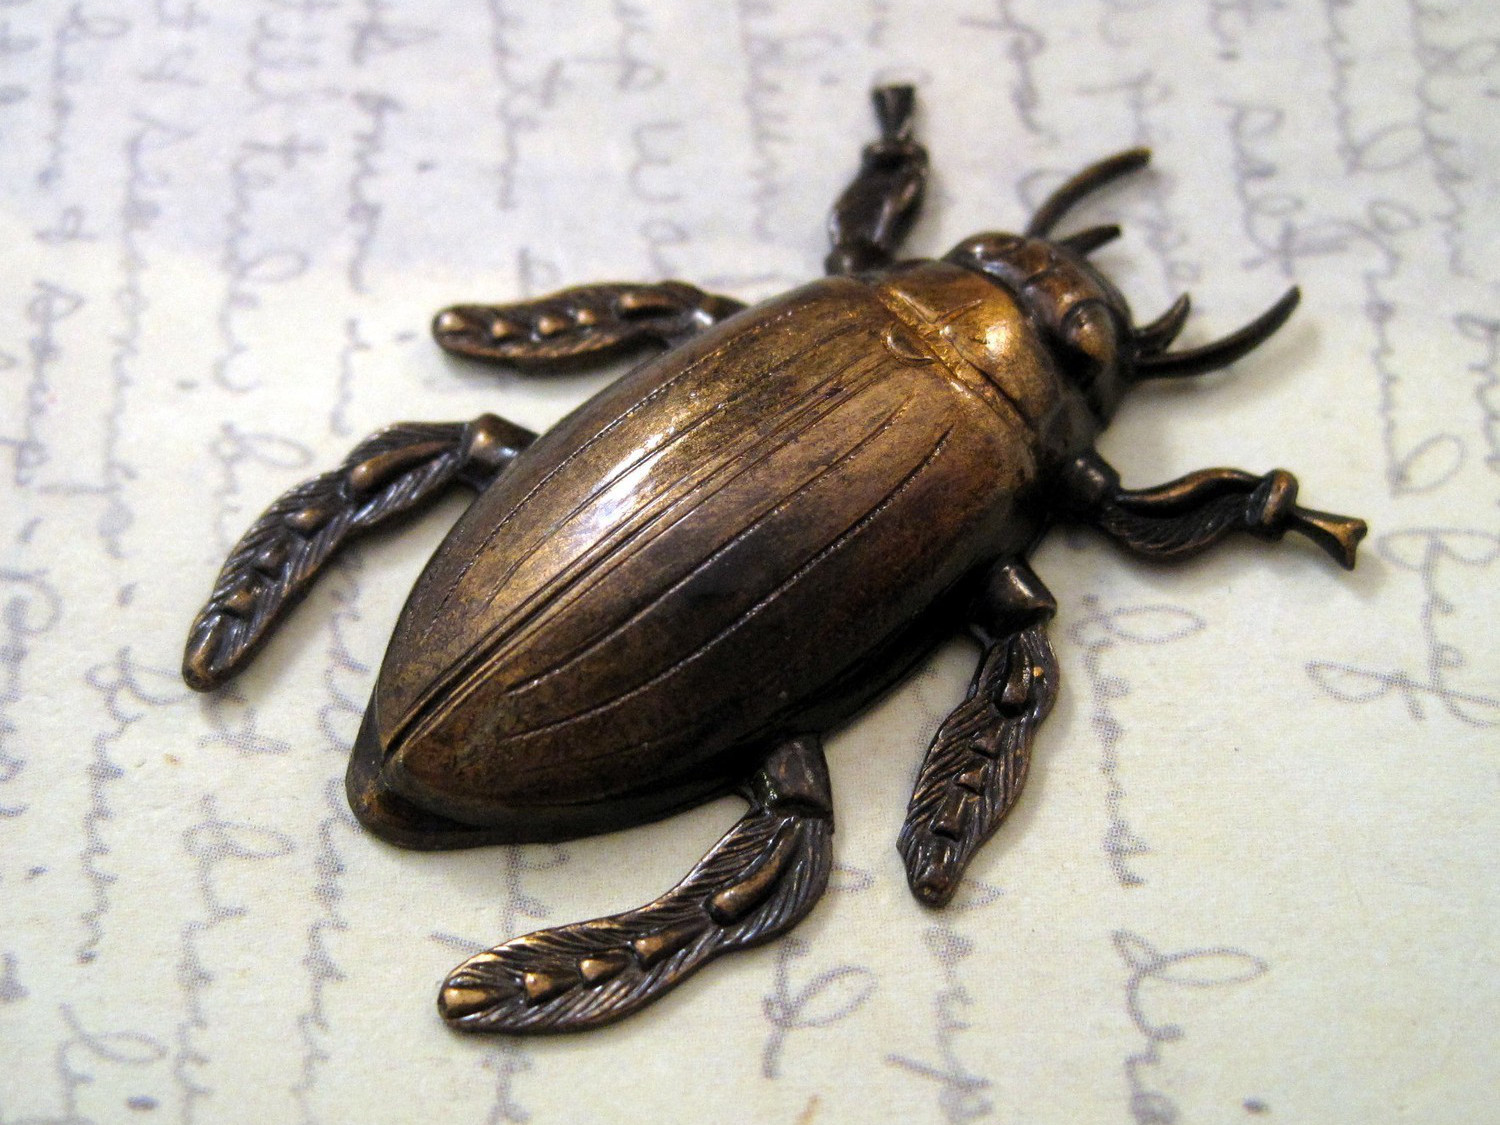 Brass Cockroach - Image Credit GlamourGirlBeads http://www.etsy.com/listing/62042780/large-antiqued-brass-cockroach1-ants3074